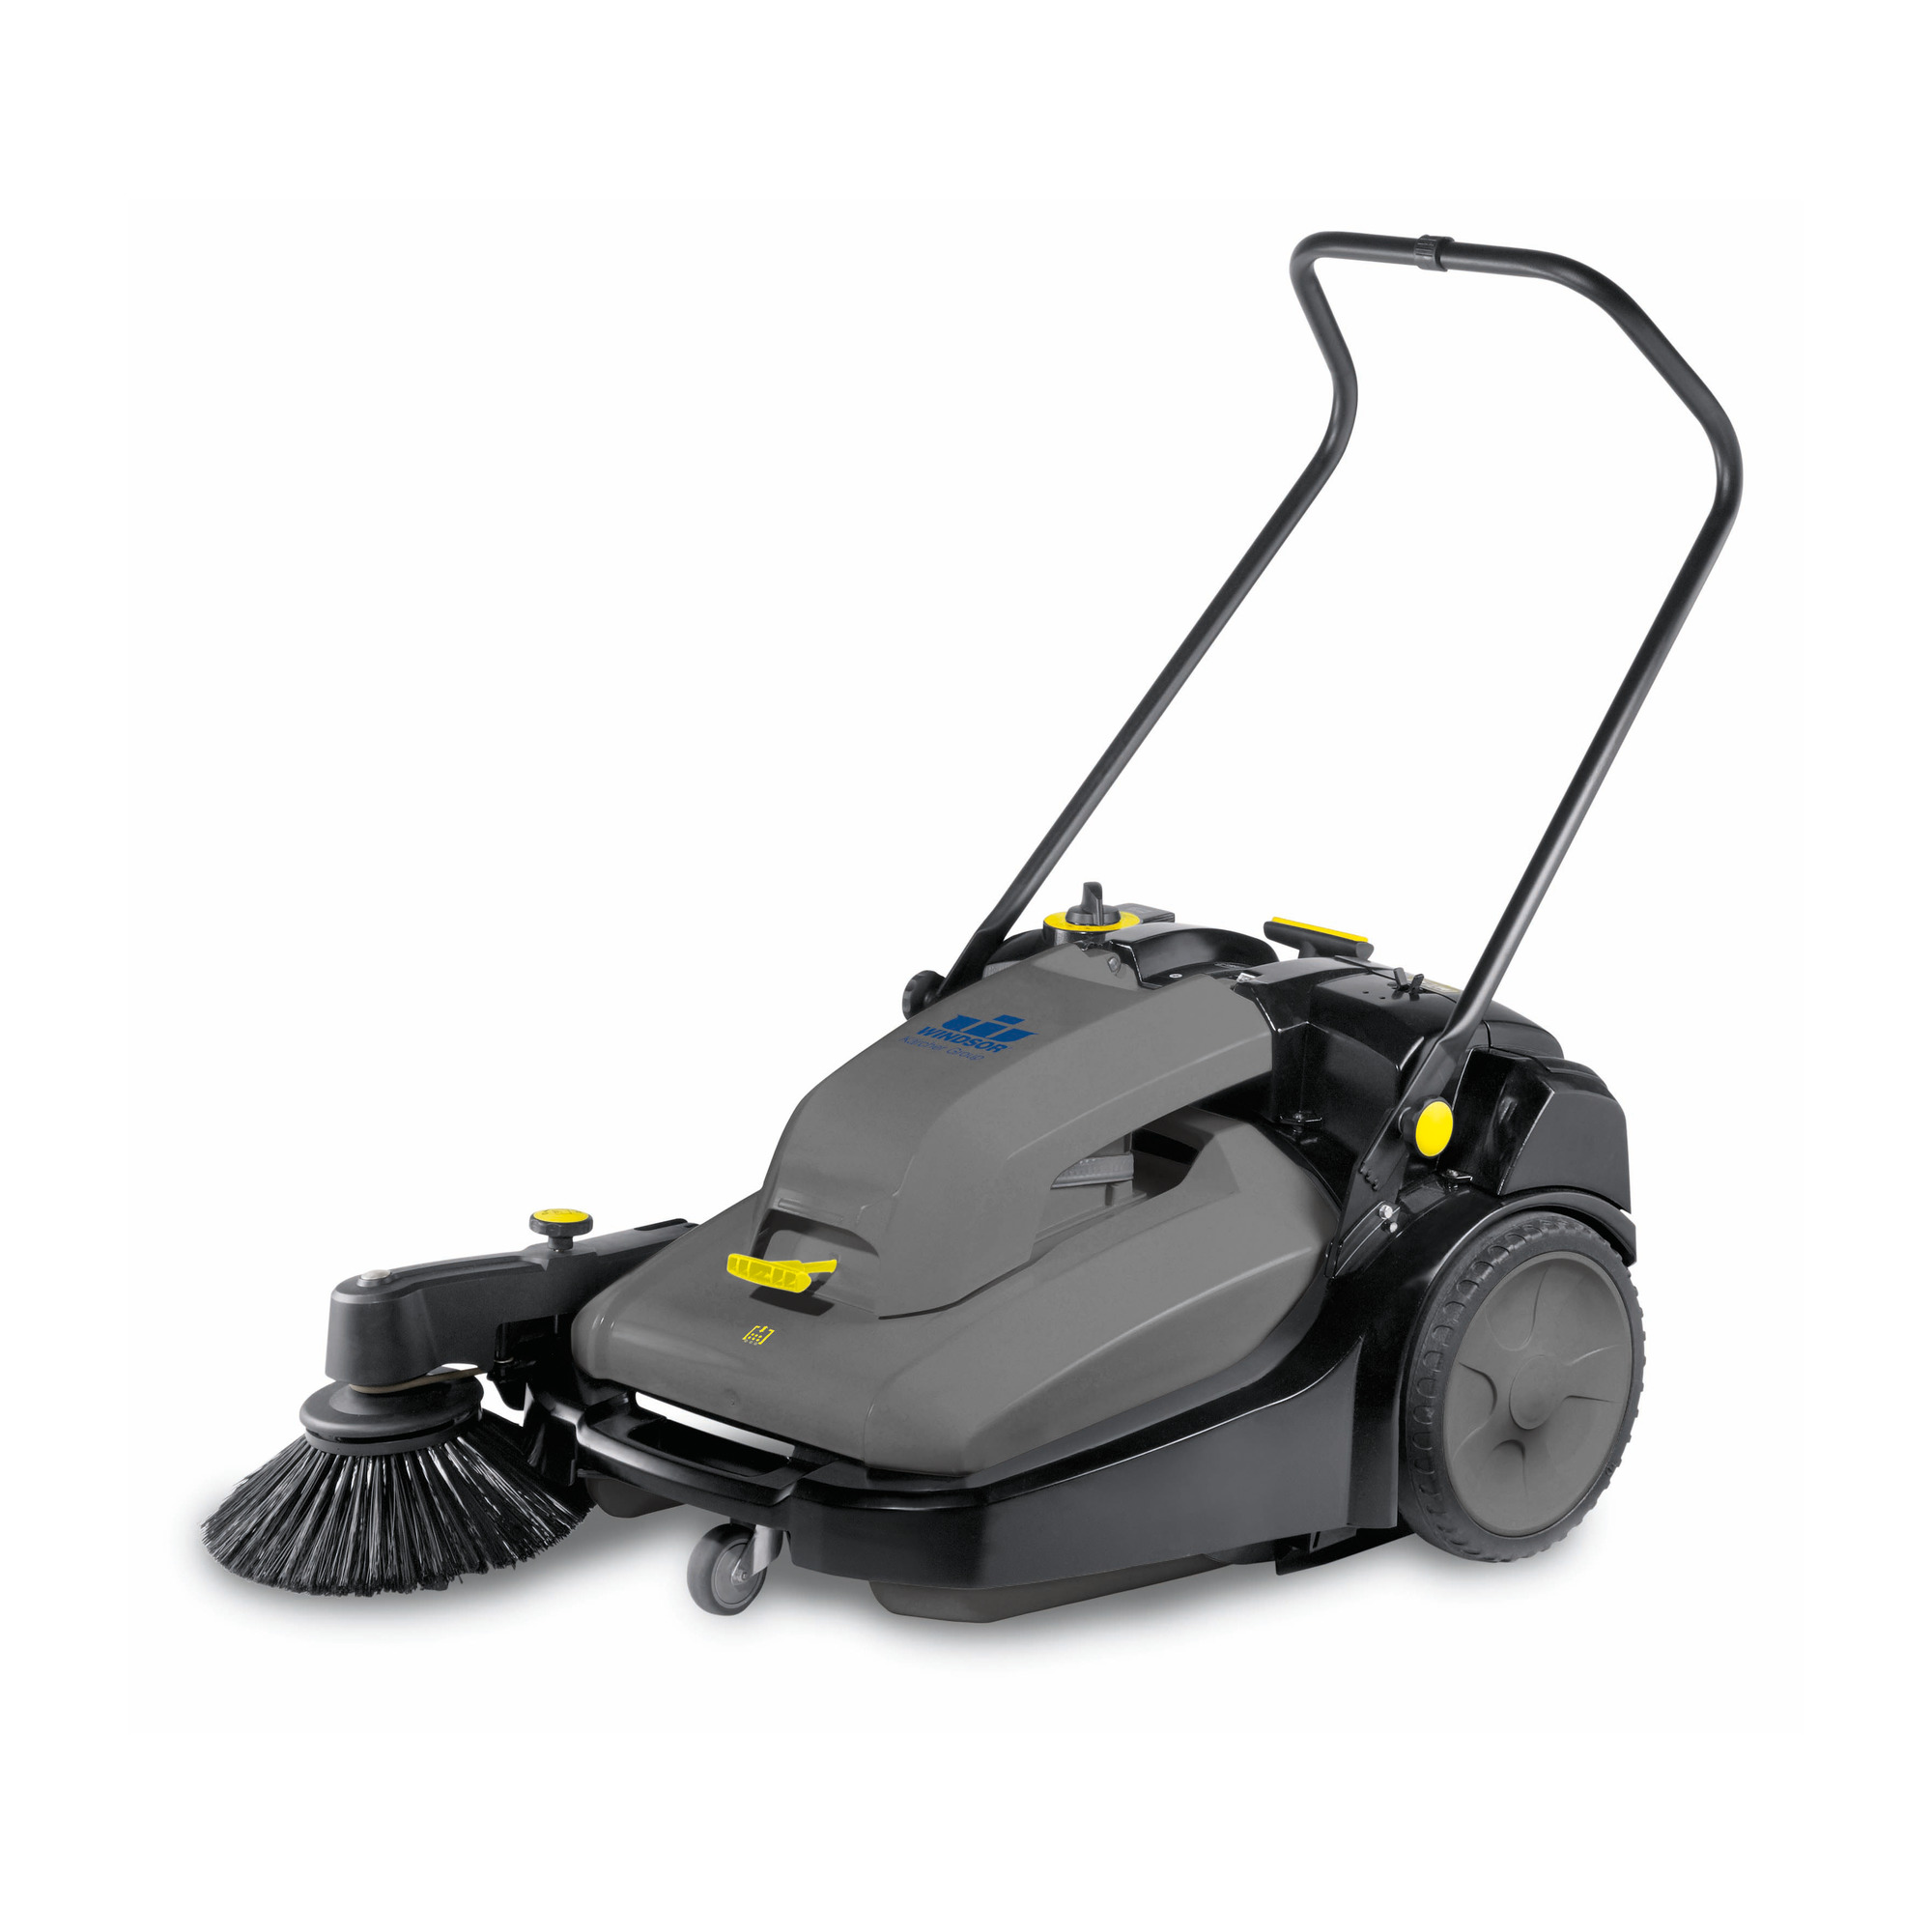 28&quot; RADIUS DELUXE WALK-BEHIND
SWEEPER W/ ACTIVE DUST
CONTROL, 1-12V, 26AH GEL
BATTERY, ON-BOARD CHARGER